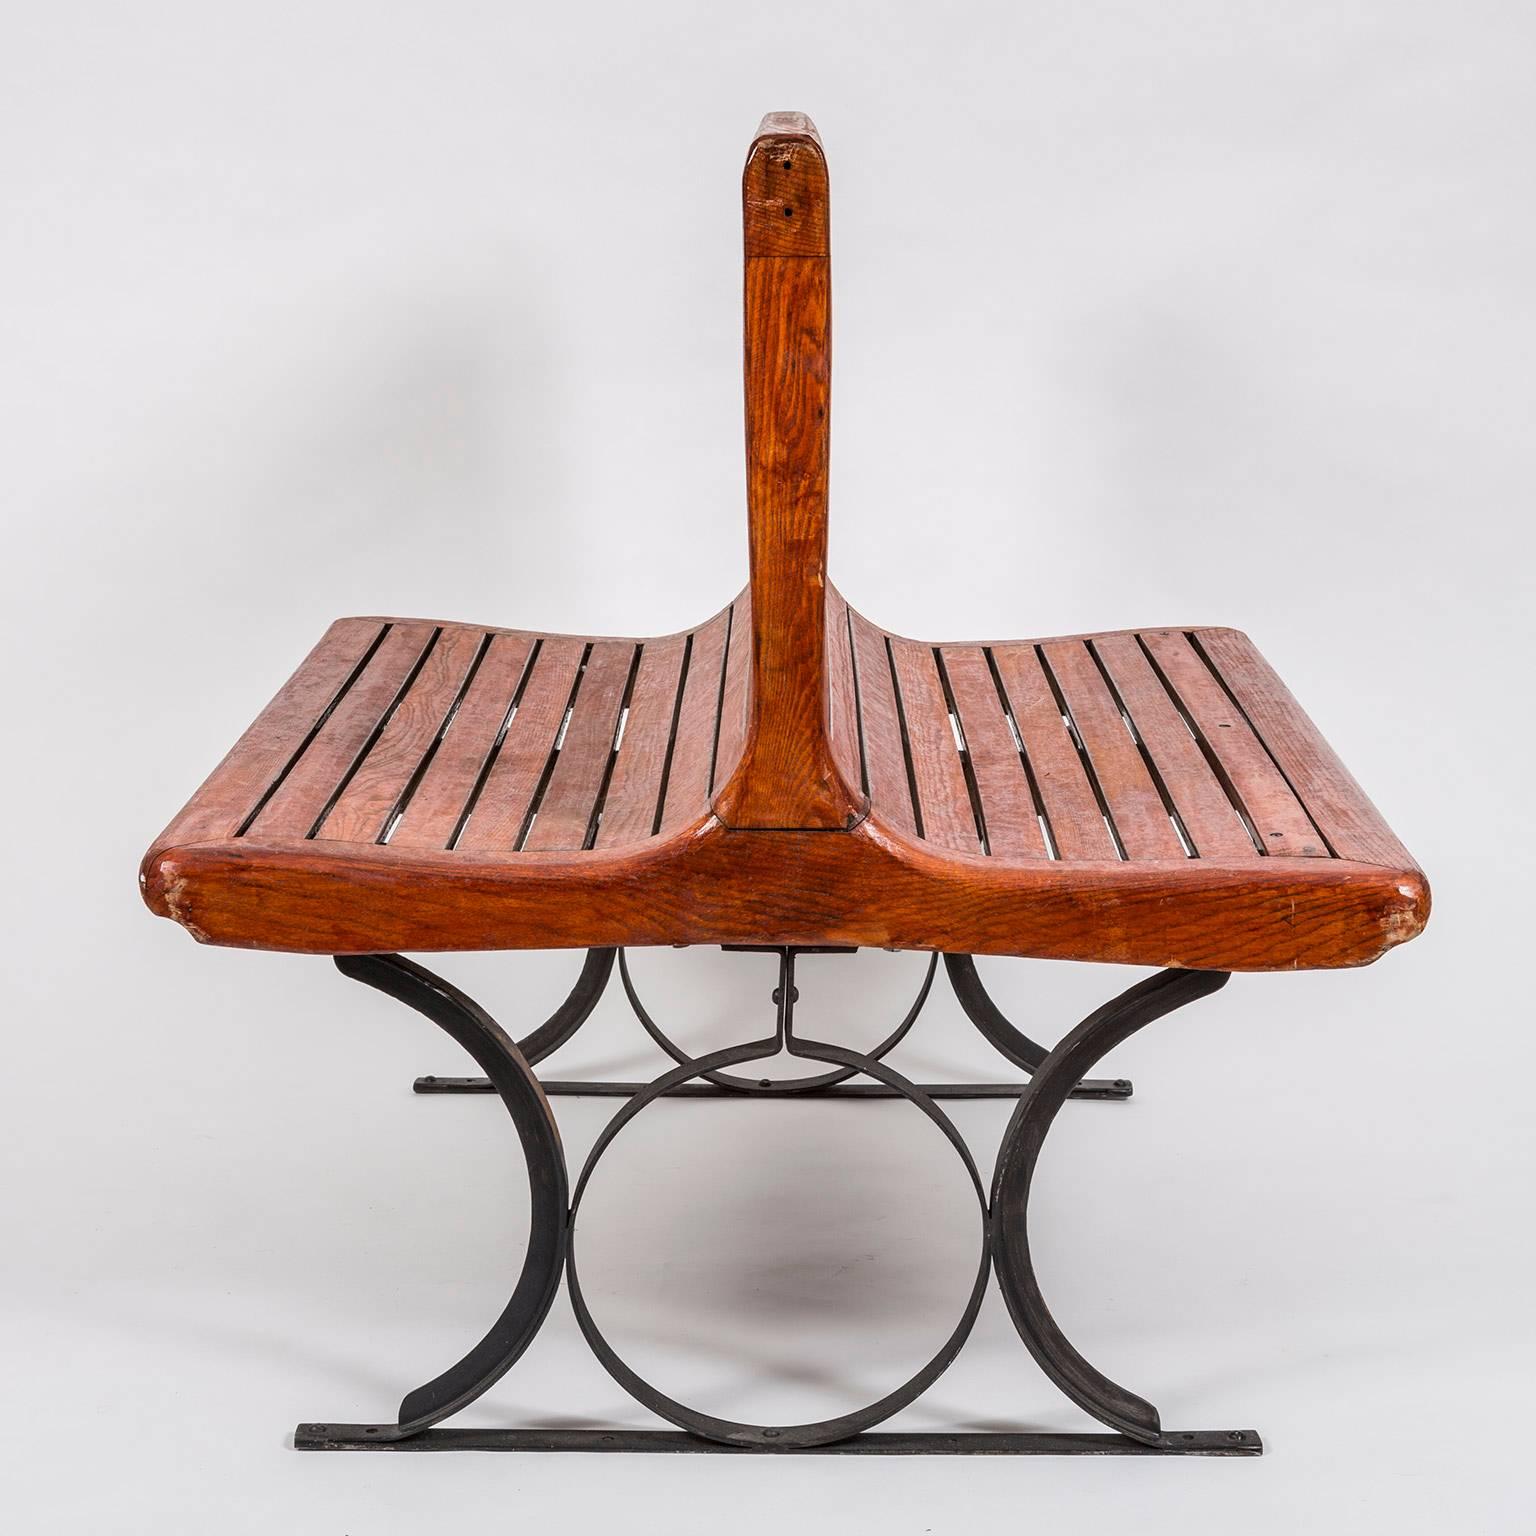 1920s second class French Paris Metro slatted wooden freestanding double sided bench, manufactured by Sprague Thomson, circa 1920. Although the majority of the Paris Metro entrances were in the Art Nouveau style, these chairs have more of an Art